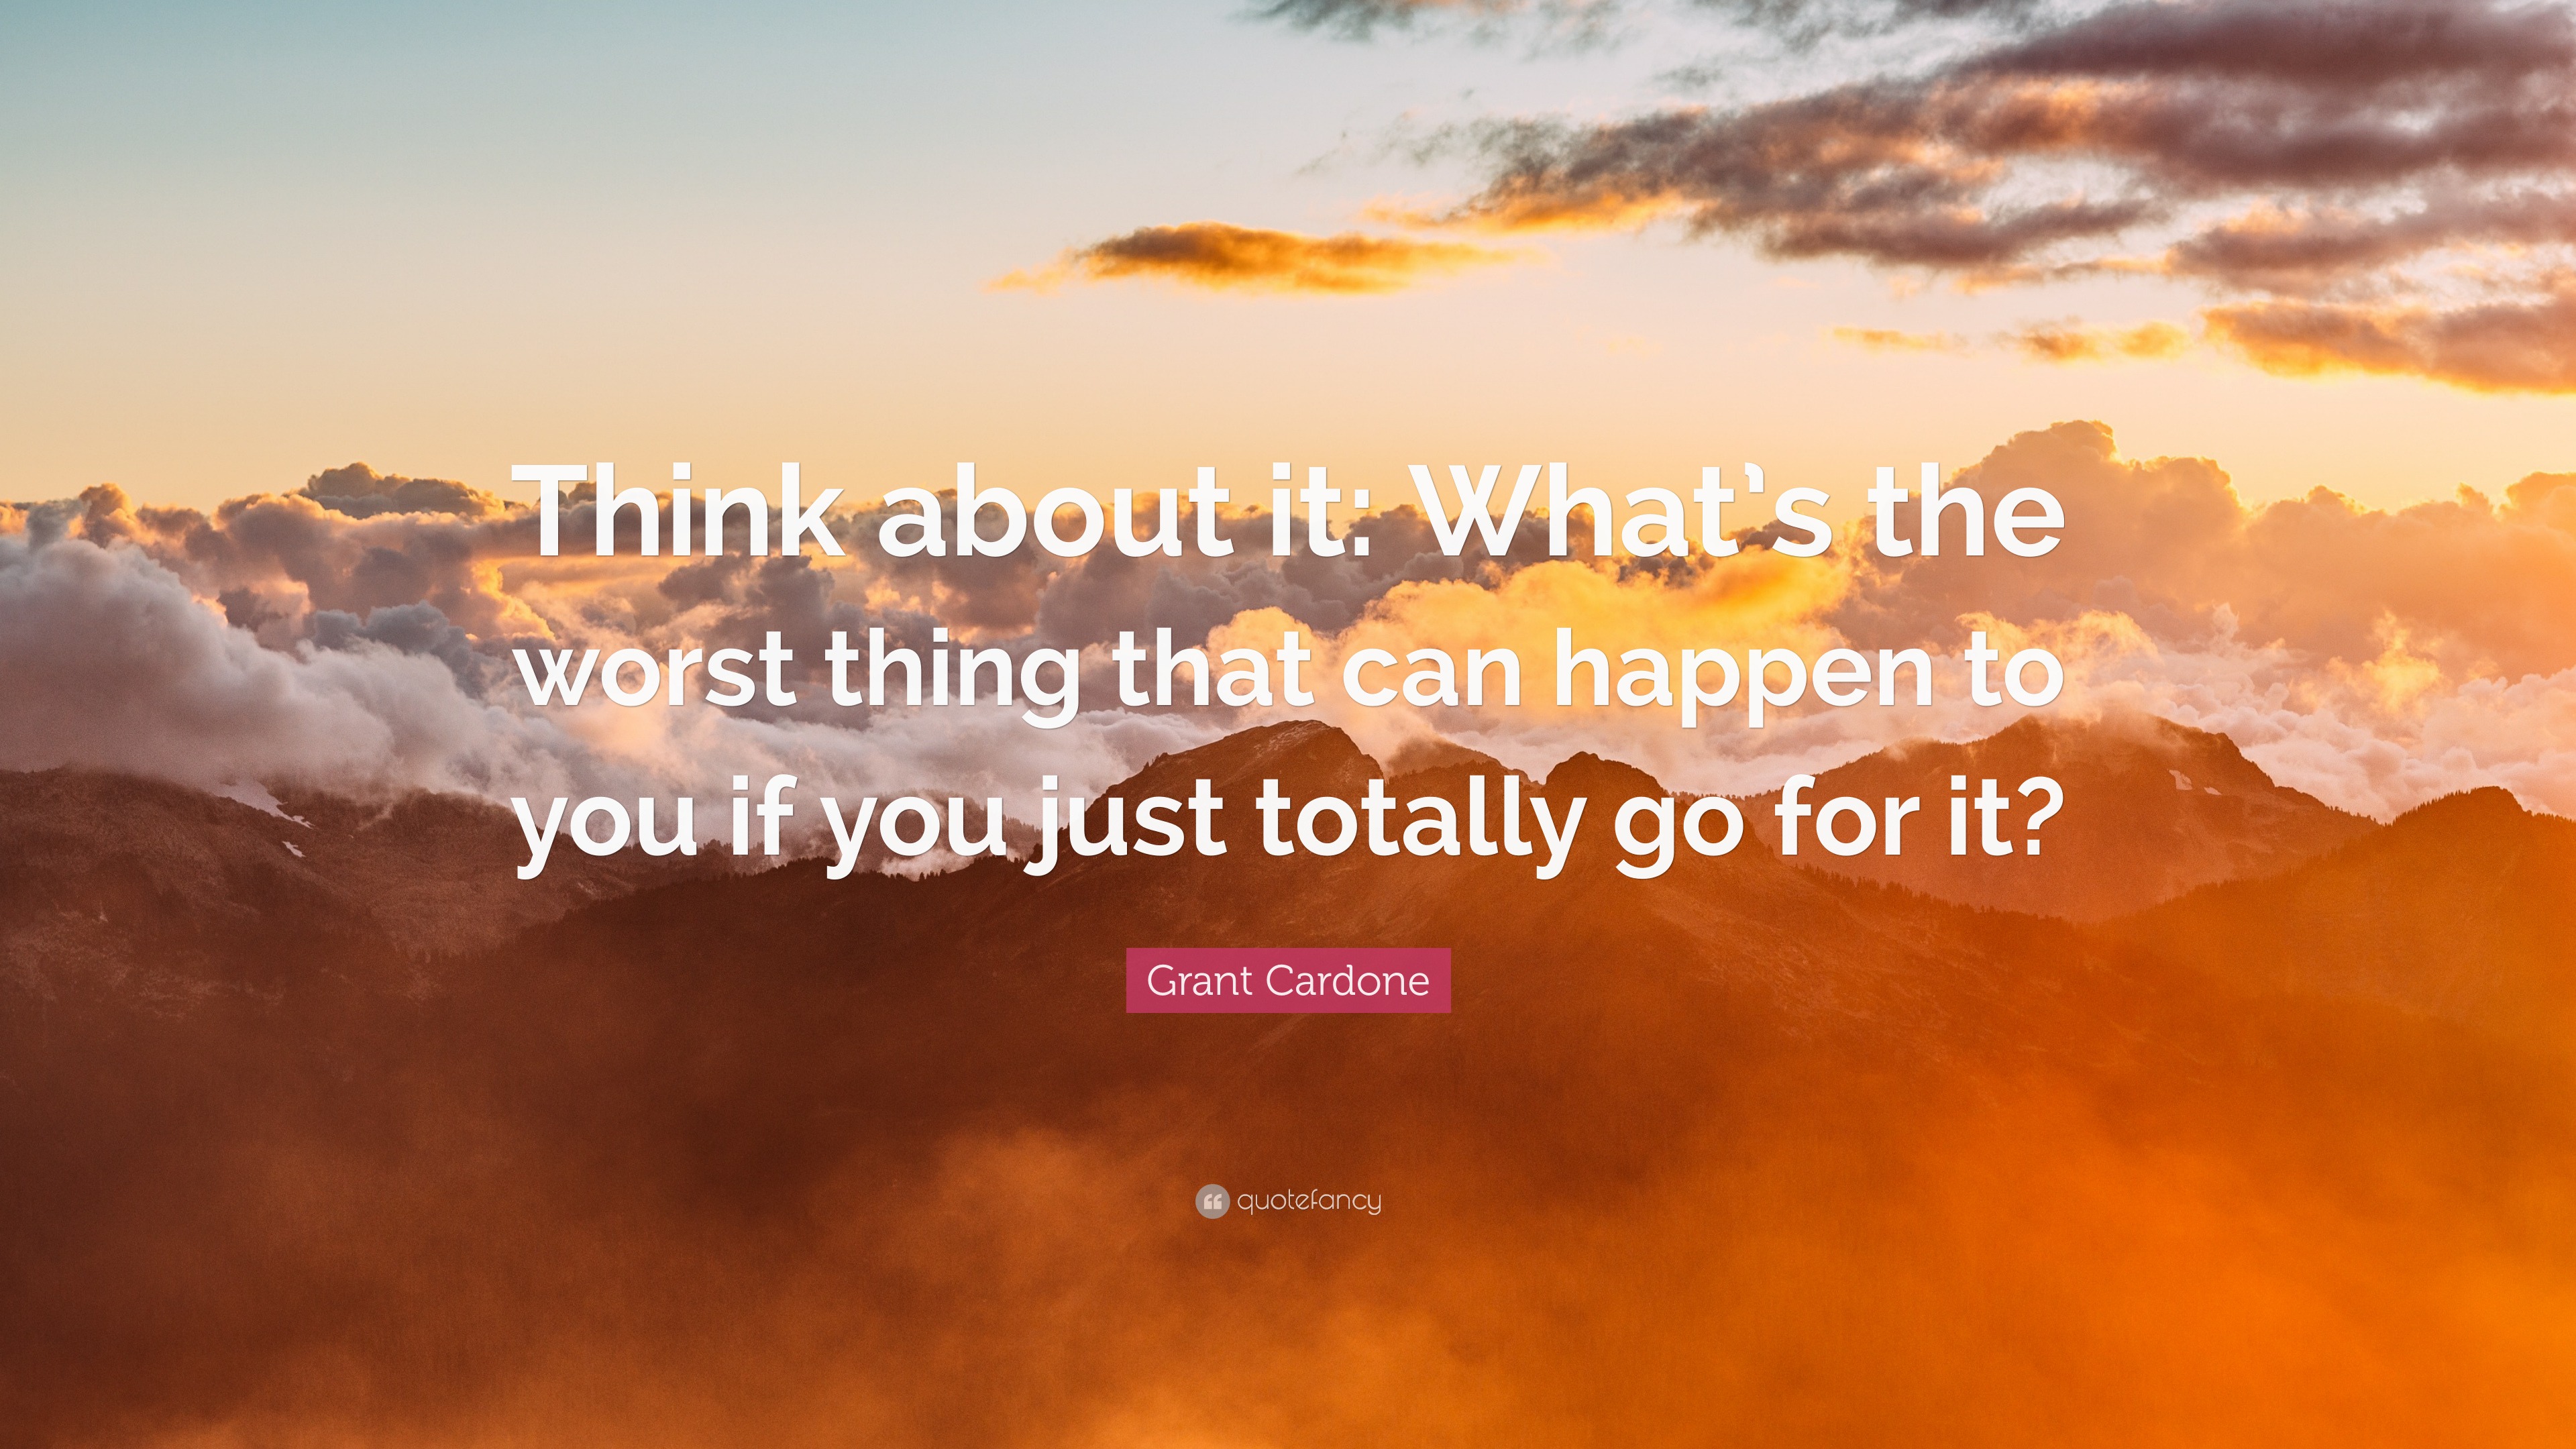 Grant Cardone Quote: “Think about it: What’s the worst thing that can